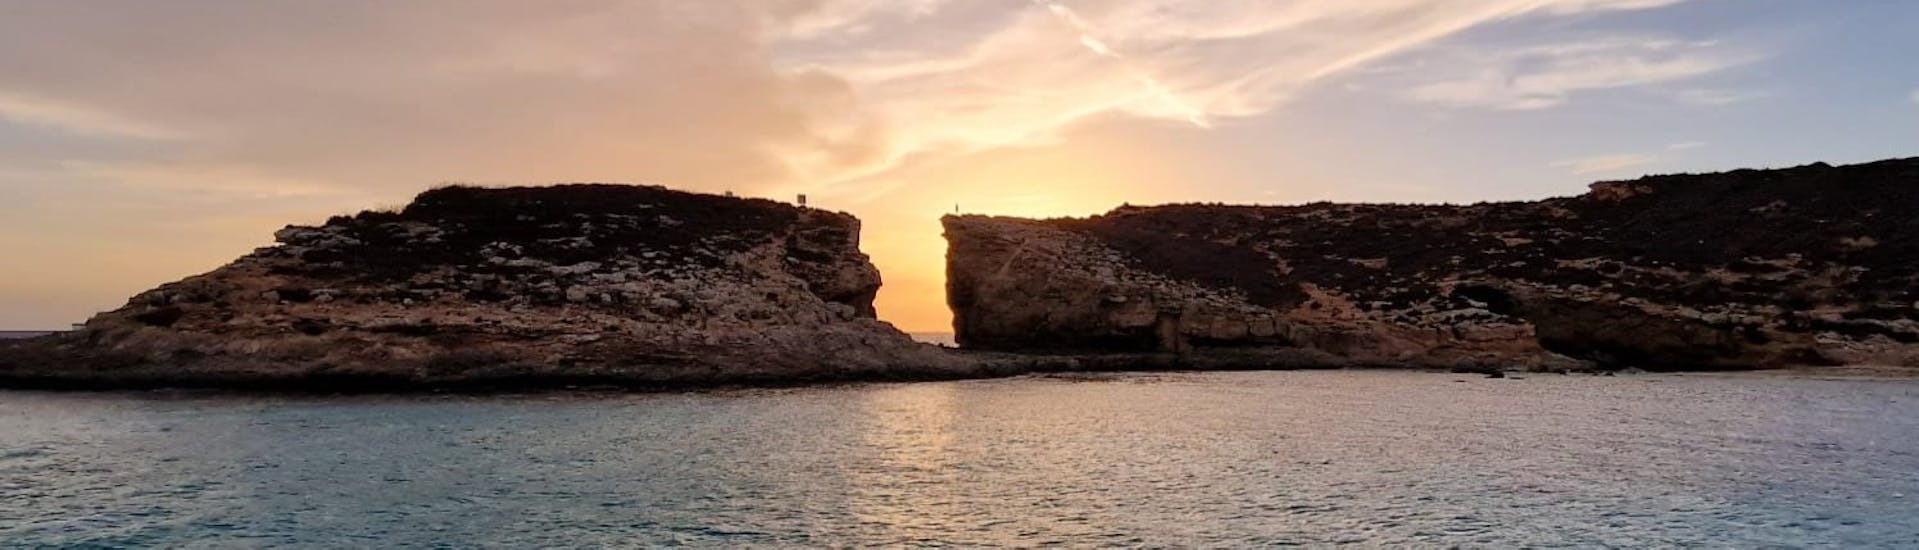 The sunset during the Private Sunset Boat Trip in Comino.